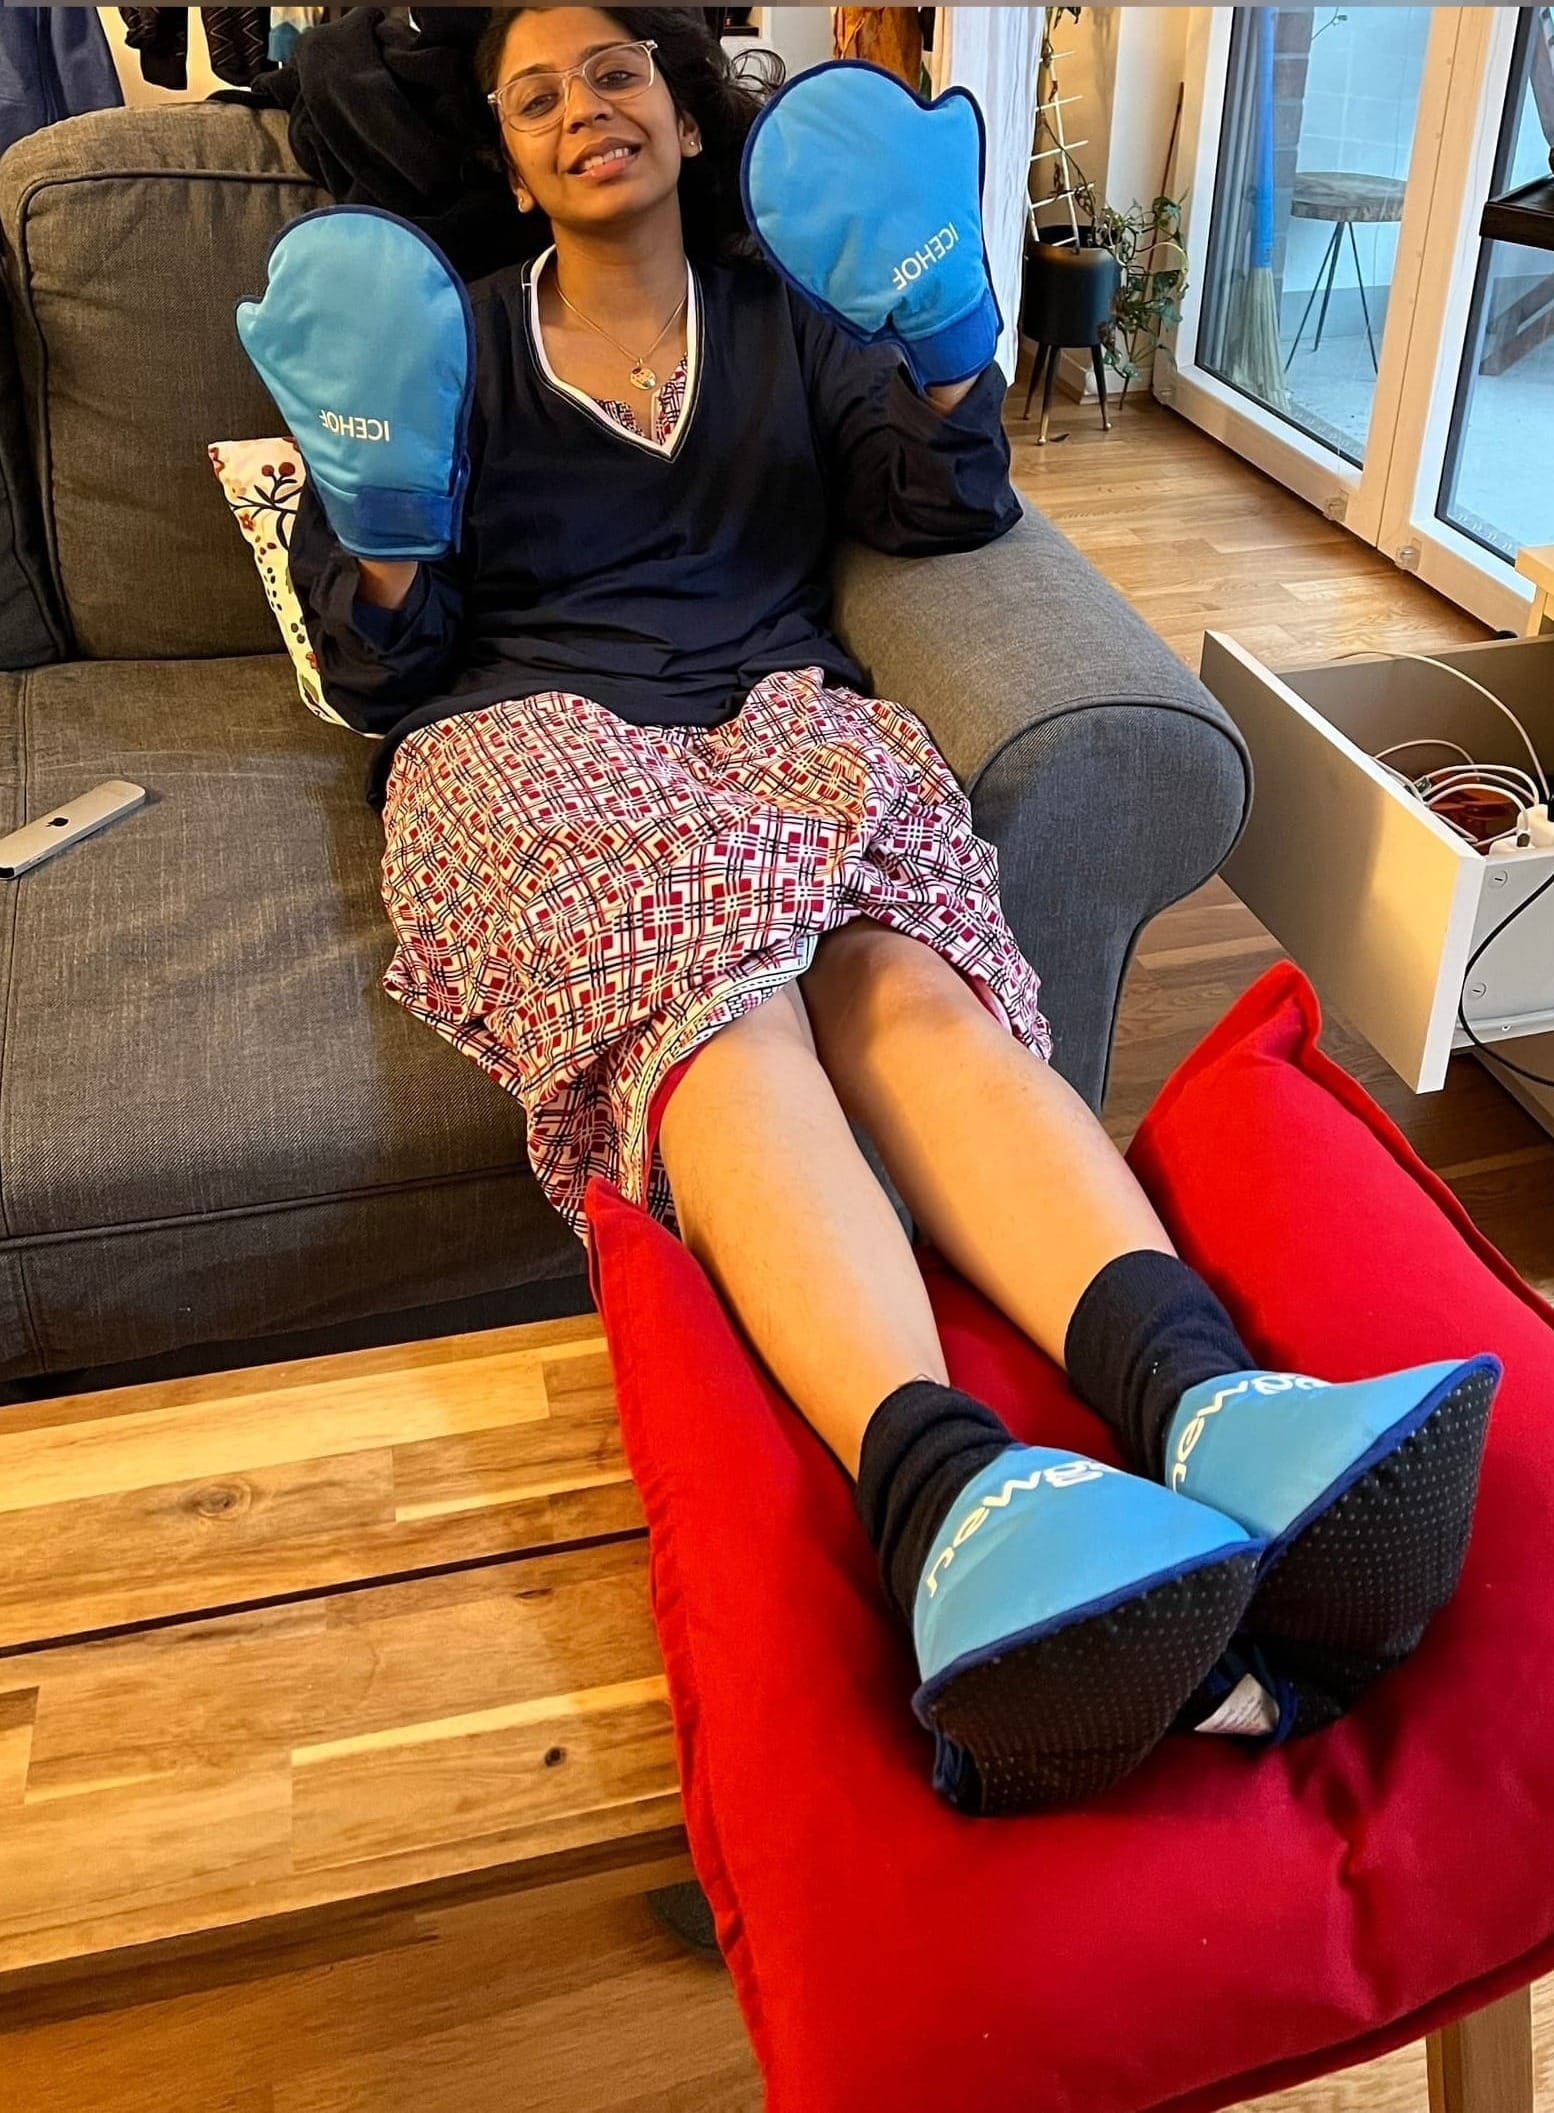 Swathi seated on a grey sofa with her feet outstretched onto a table opposite to her. She's wearing heat packs on her feet and hands.